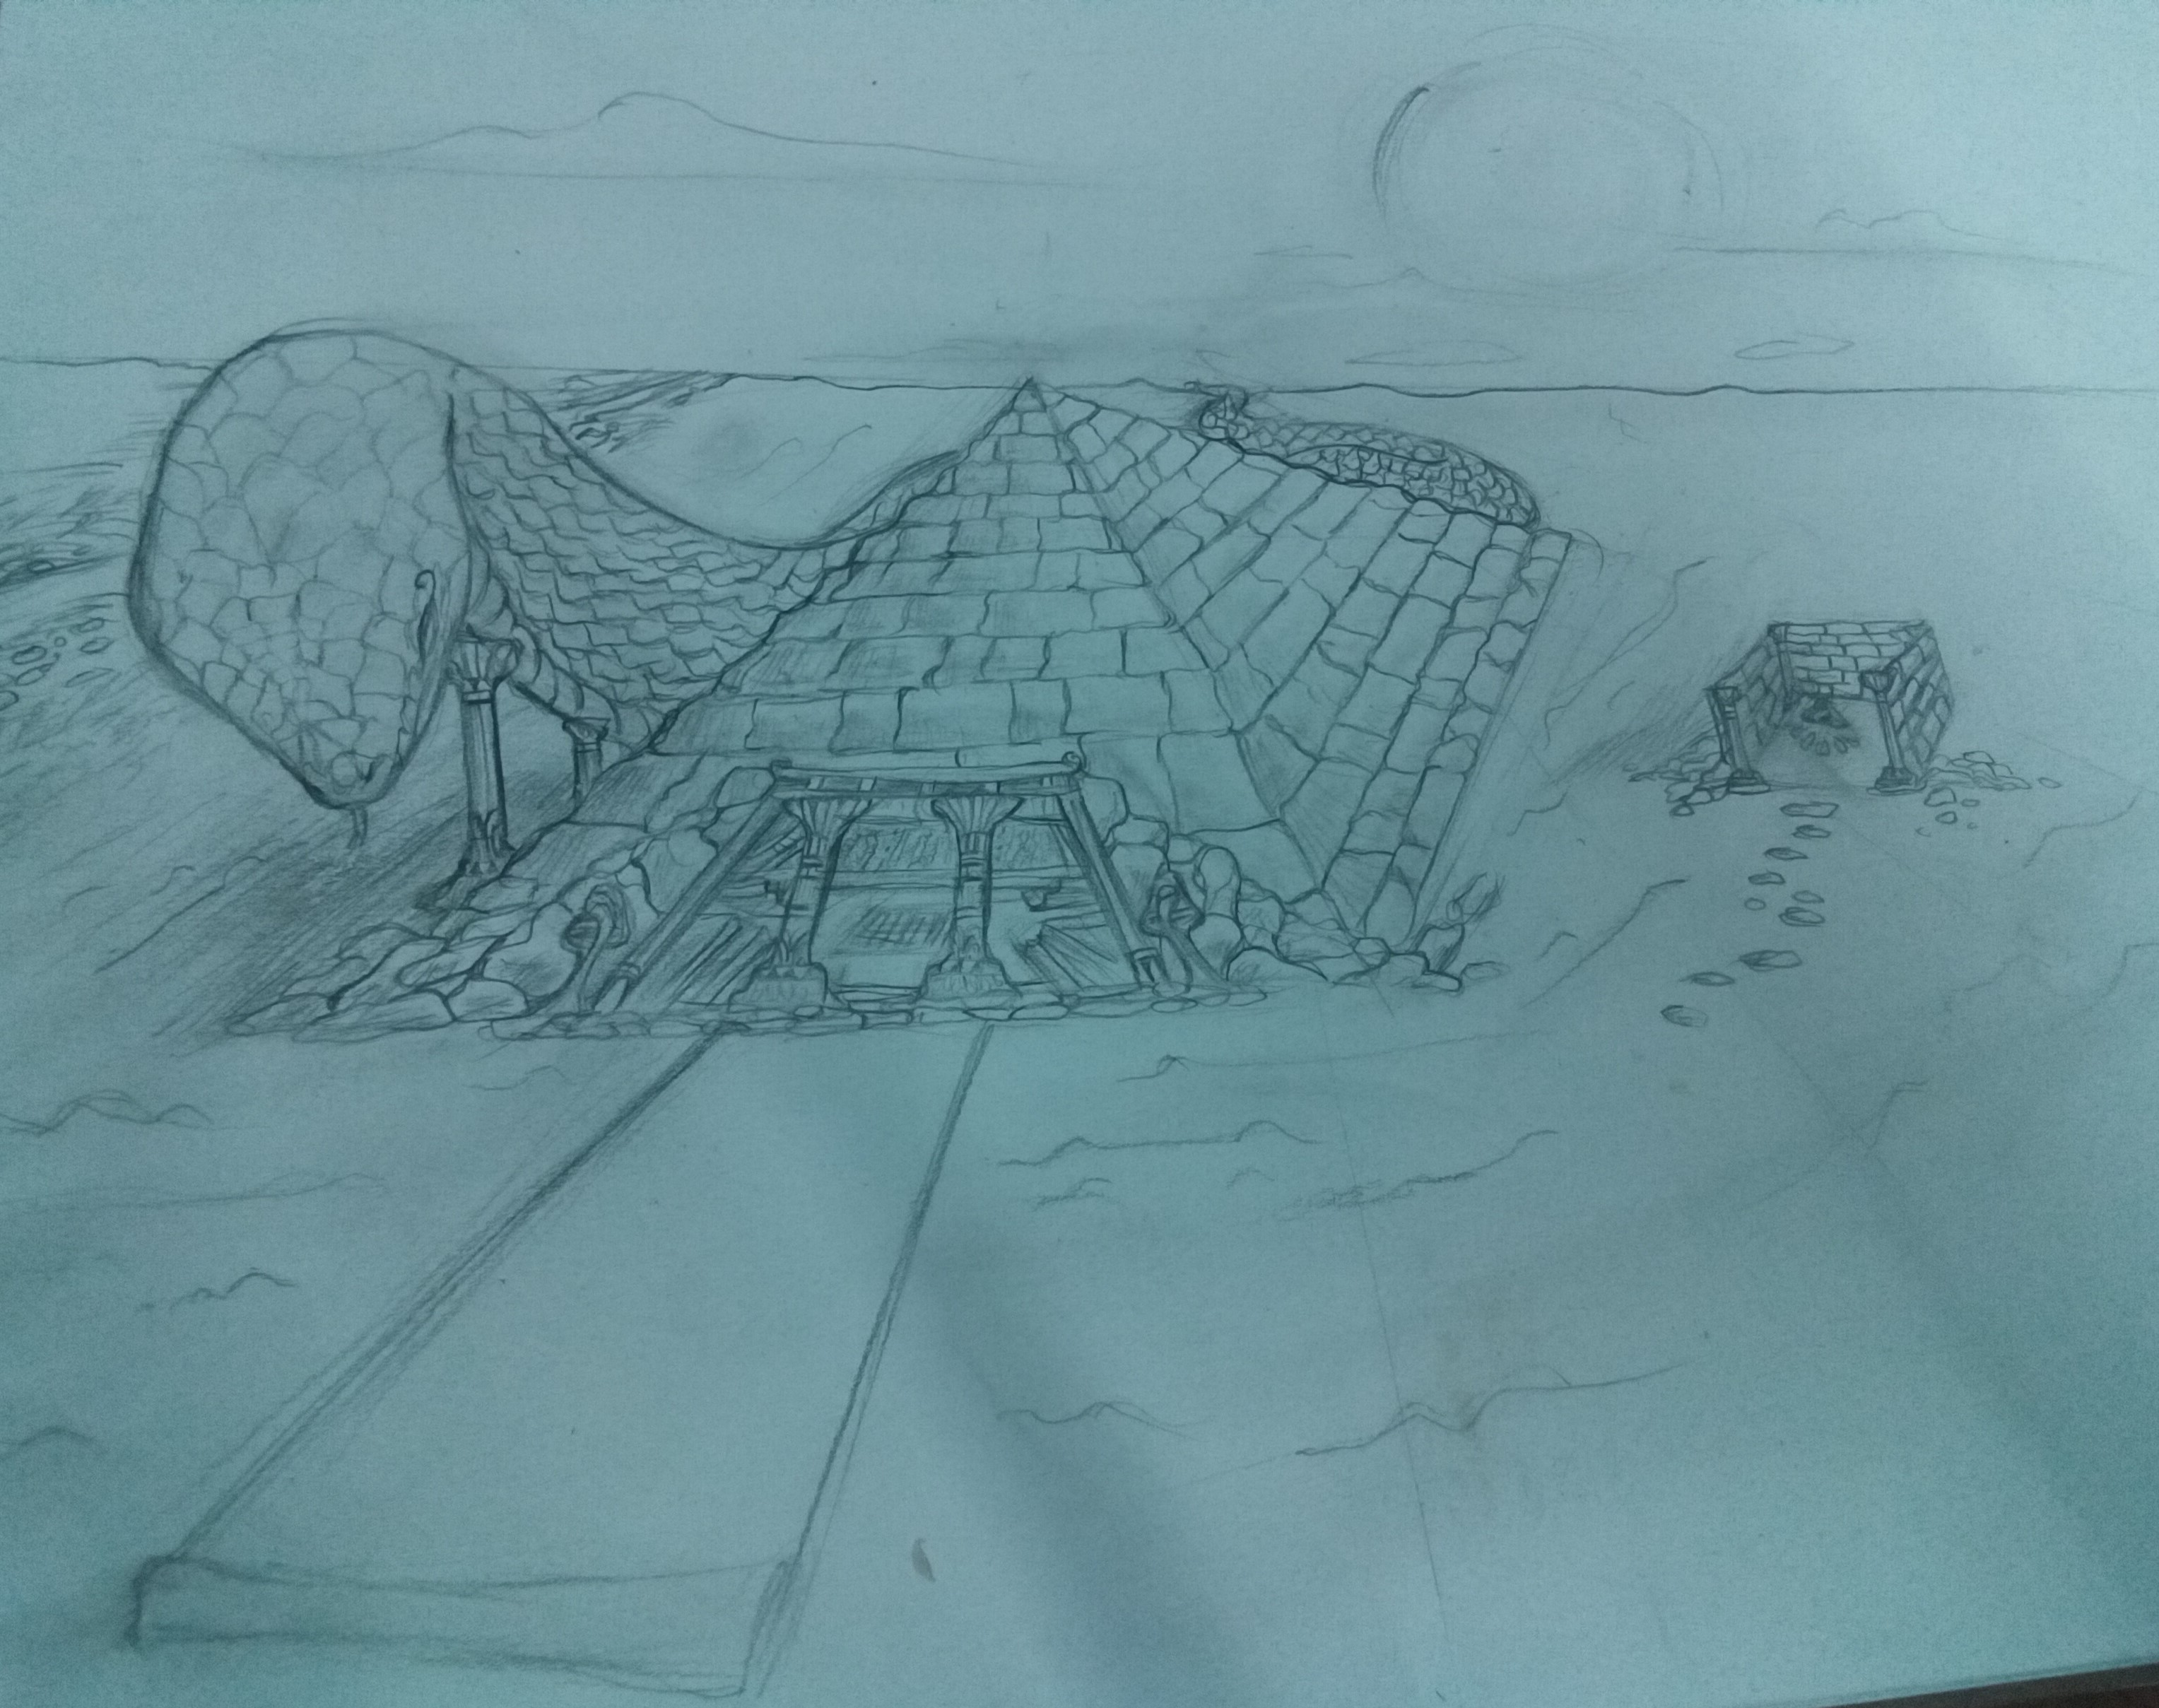 Artwork of a pyramid and a large snake